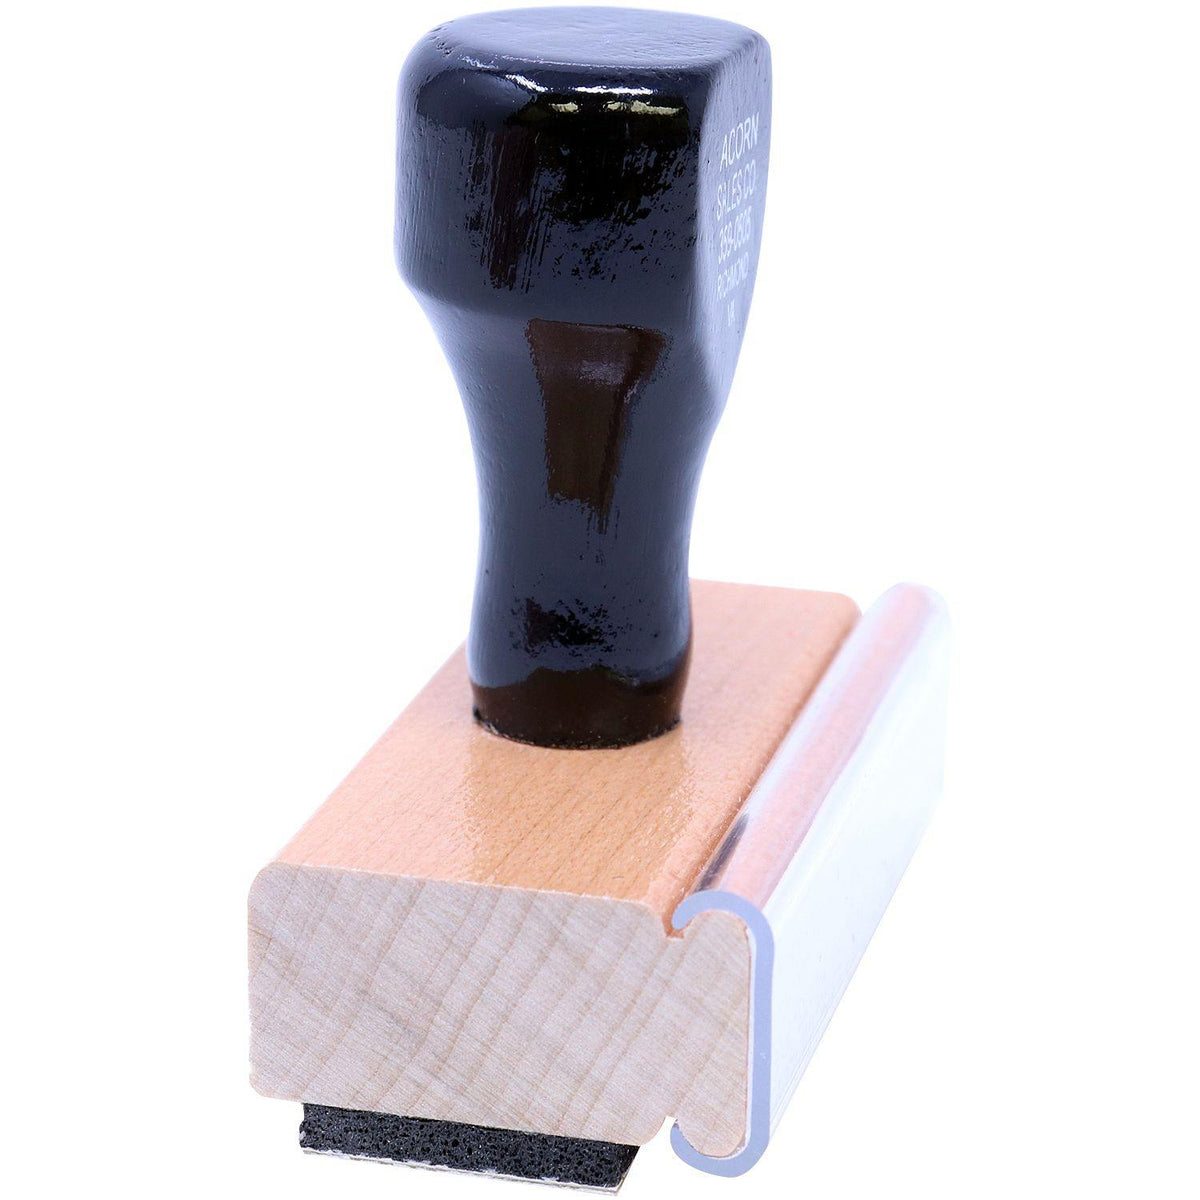 Side View of Special Standard Mail Rubber Stamp at an Angle